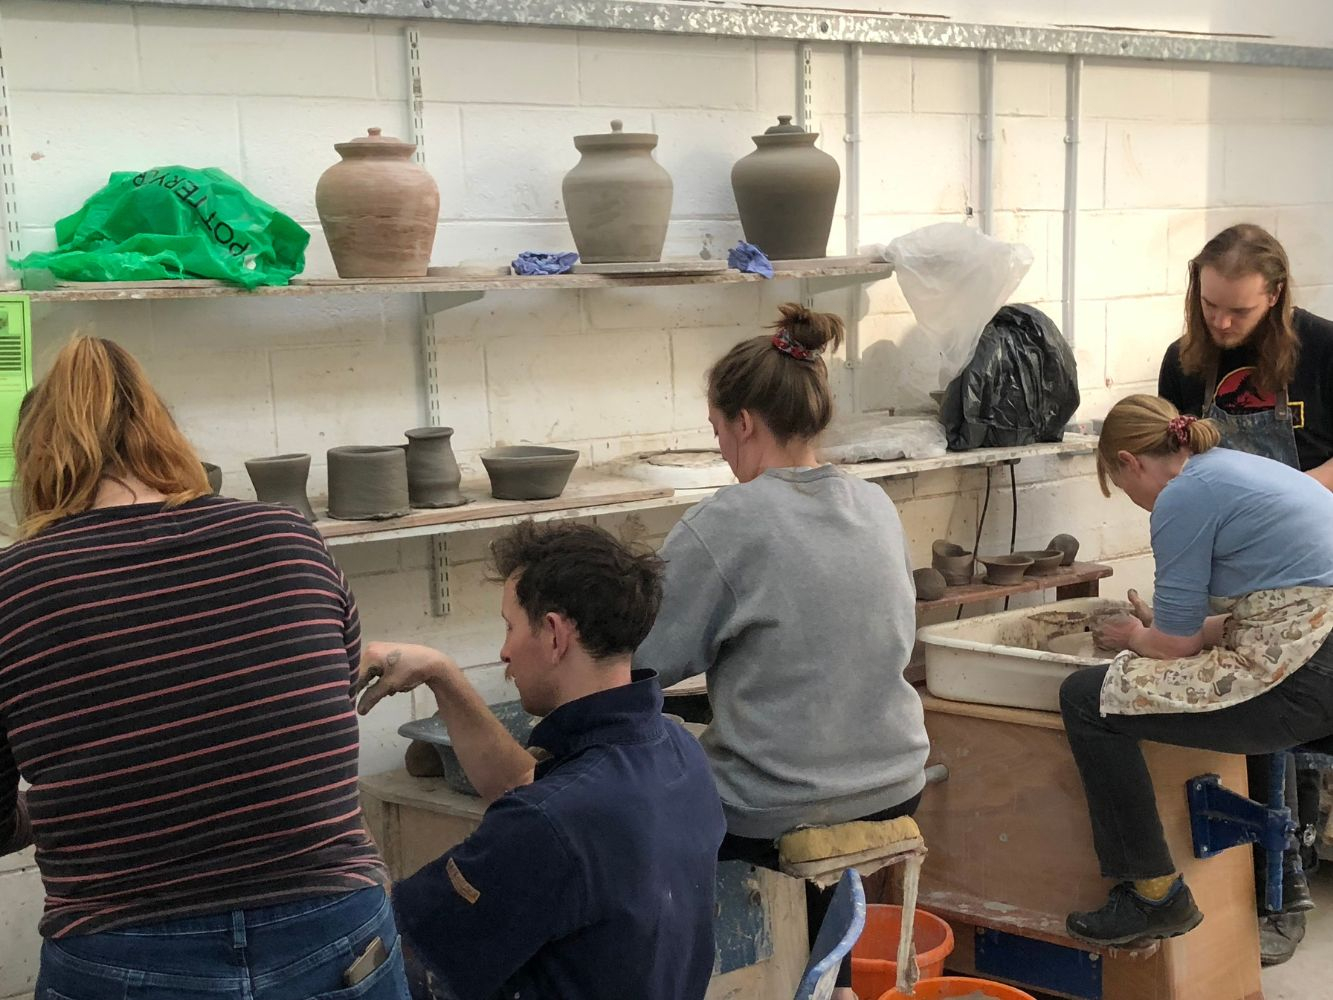 People trying pottery